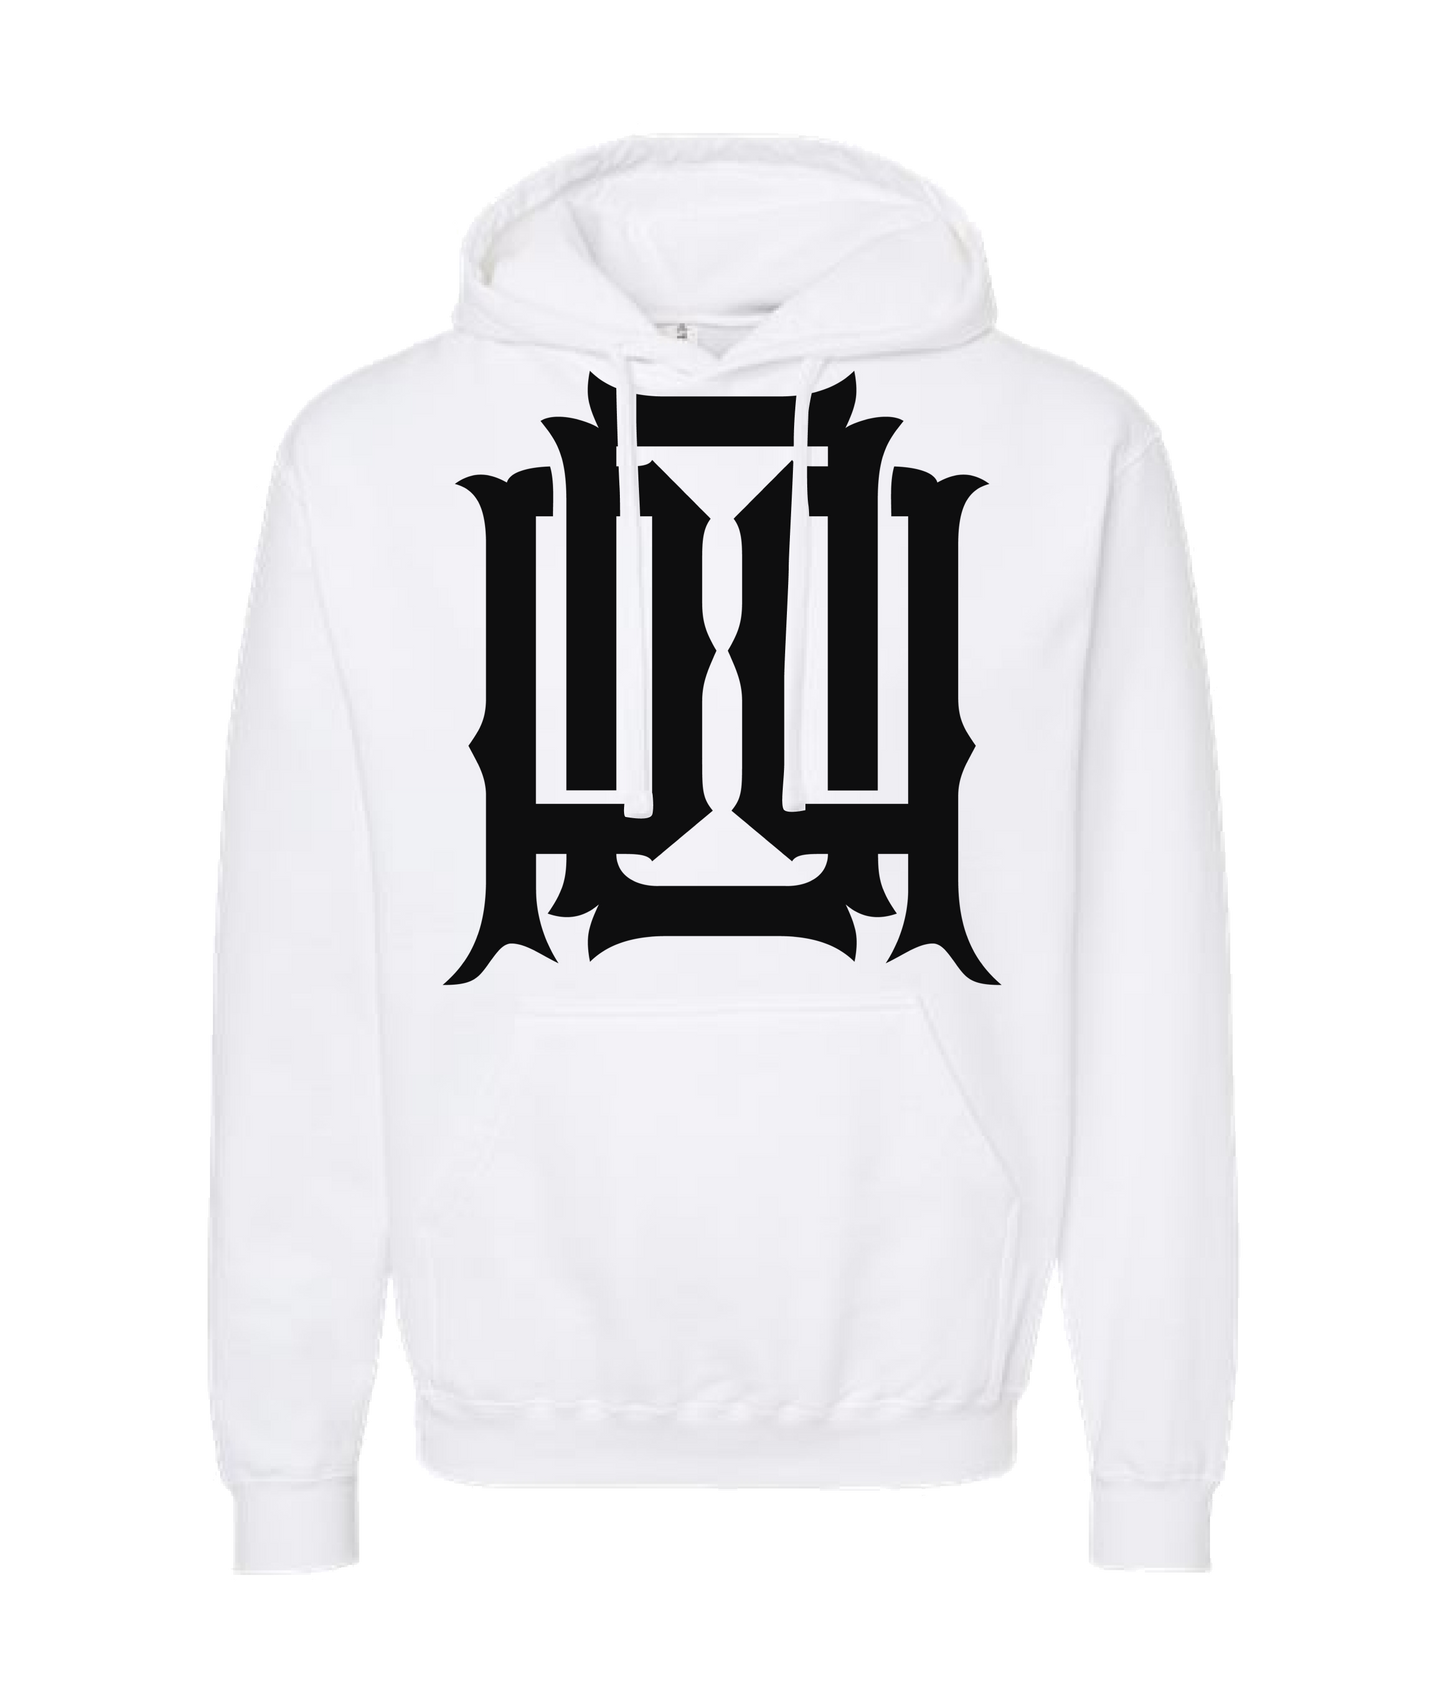 Plates Over Pints - LOGO 2 - White Hoodie